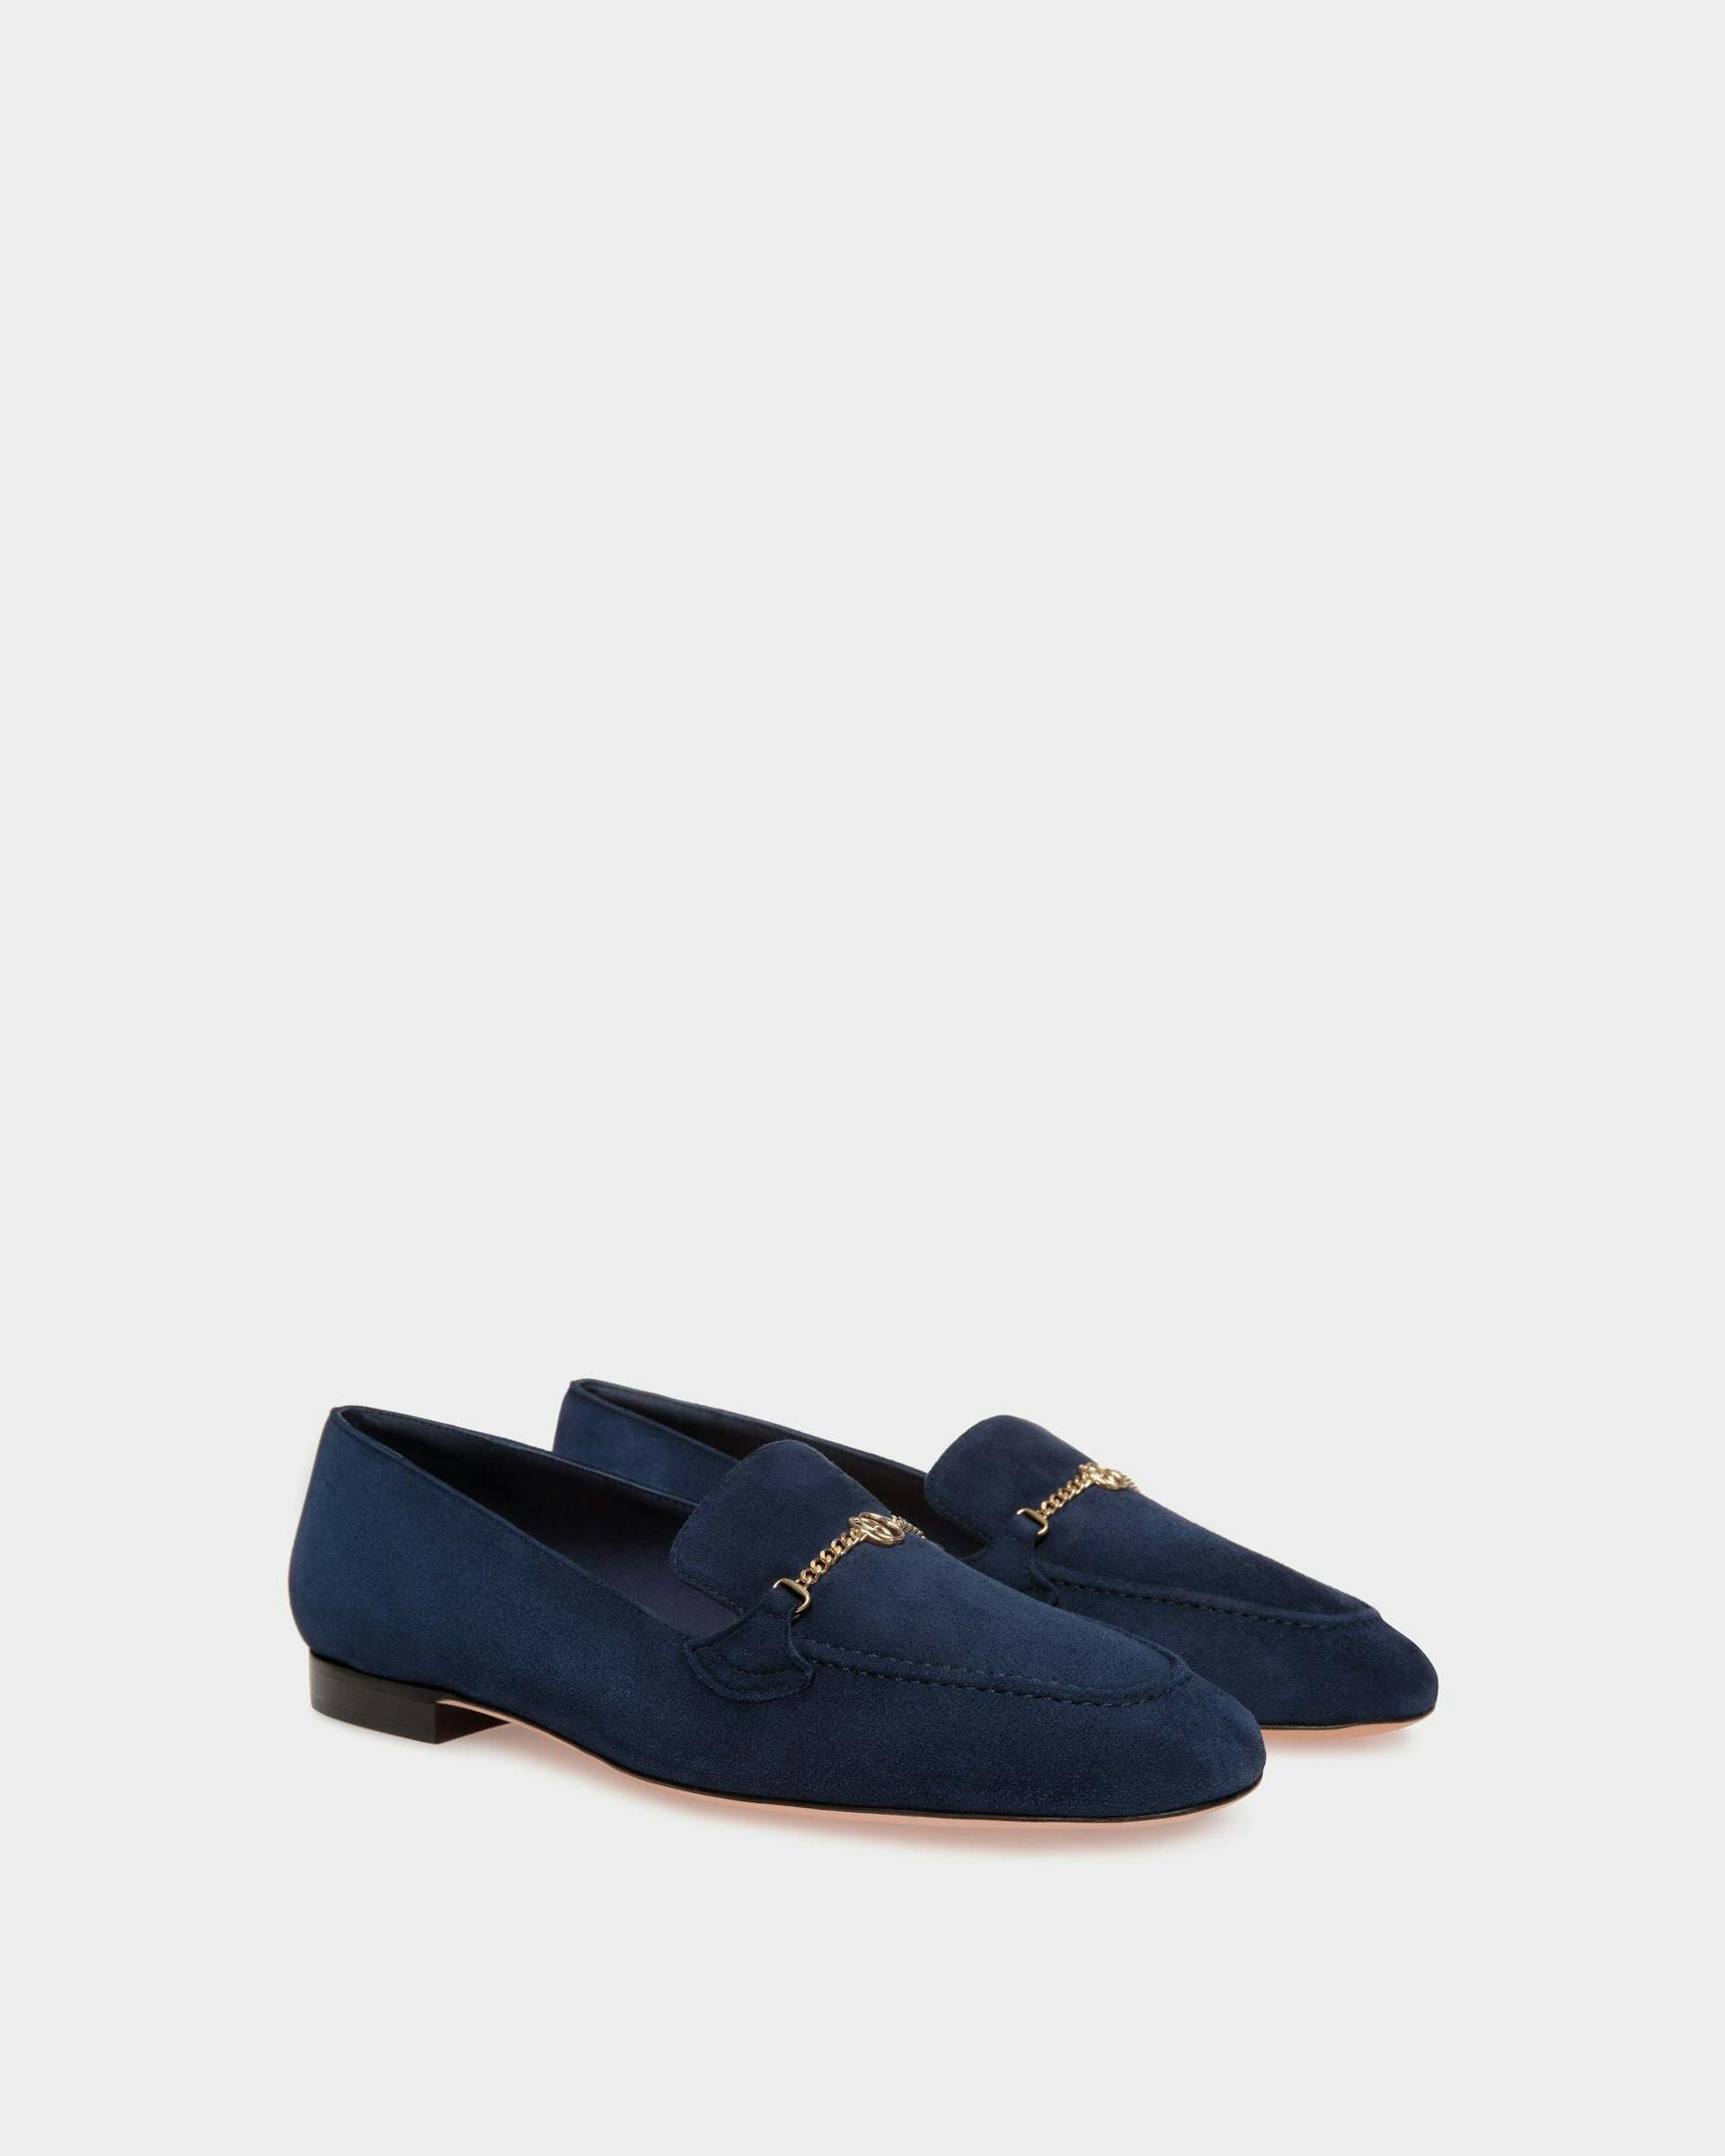 Women's Daily Emblem Loafer in Blue Suede | Bally | Still Life 3/4 Front